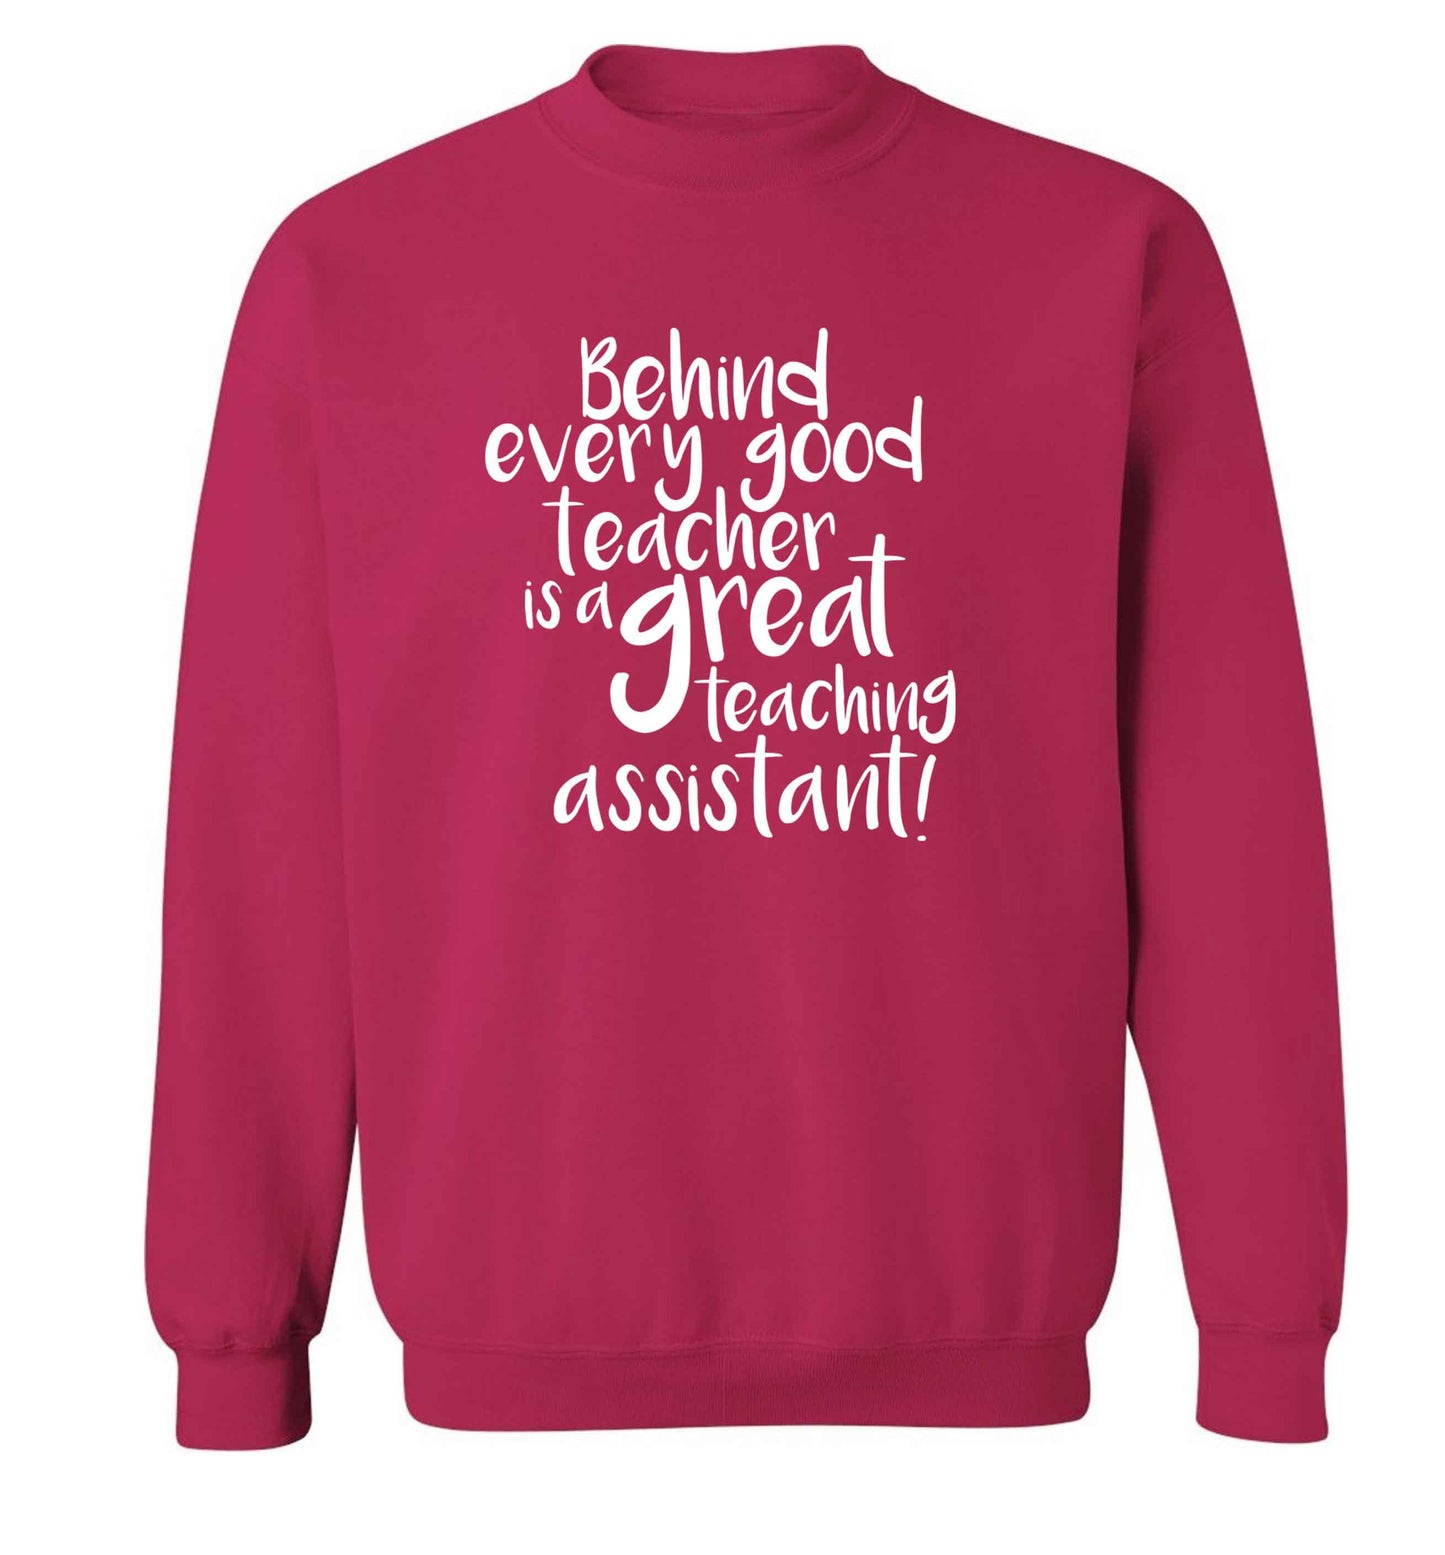 Behind every good teacher is a great teaching assistant adult's unisex pink sweater 2XL